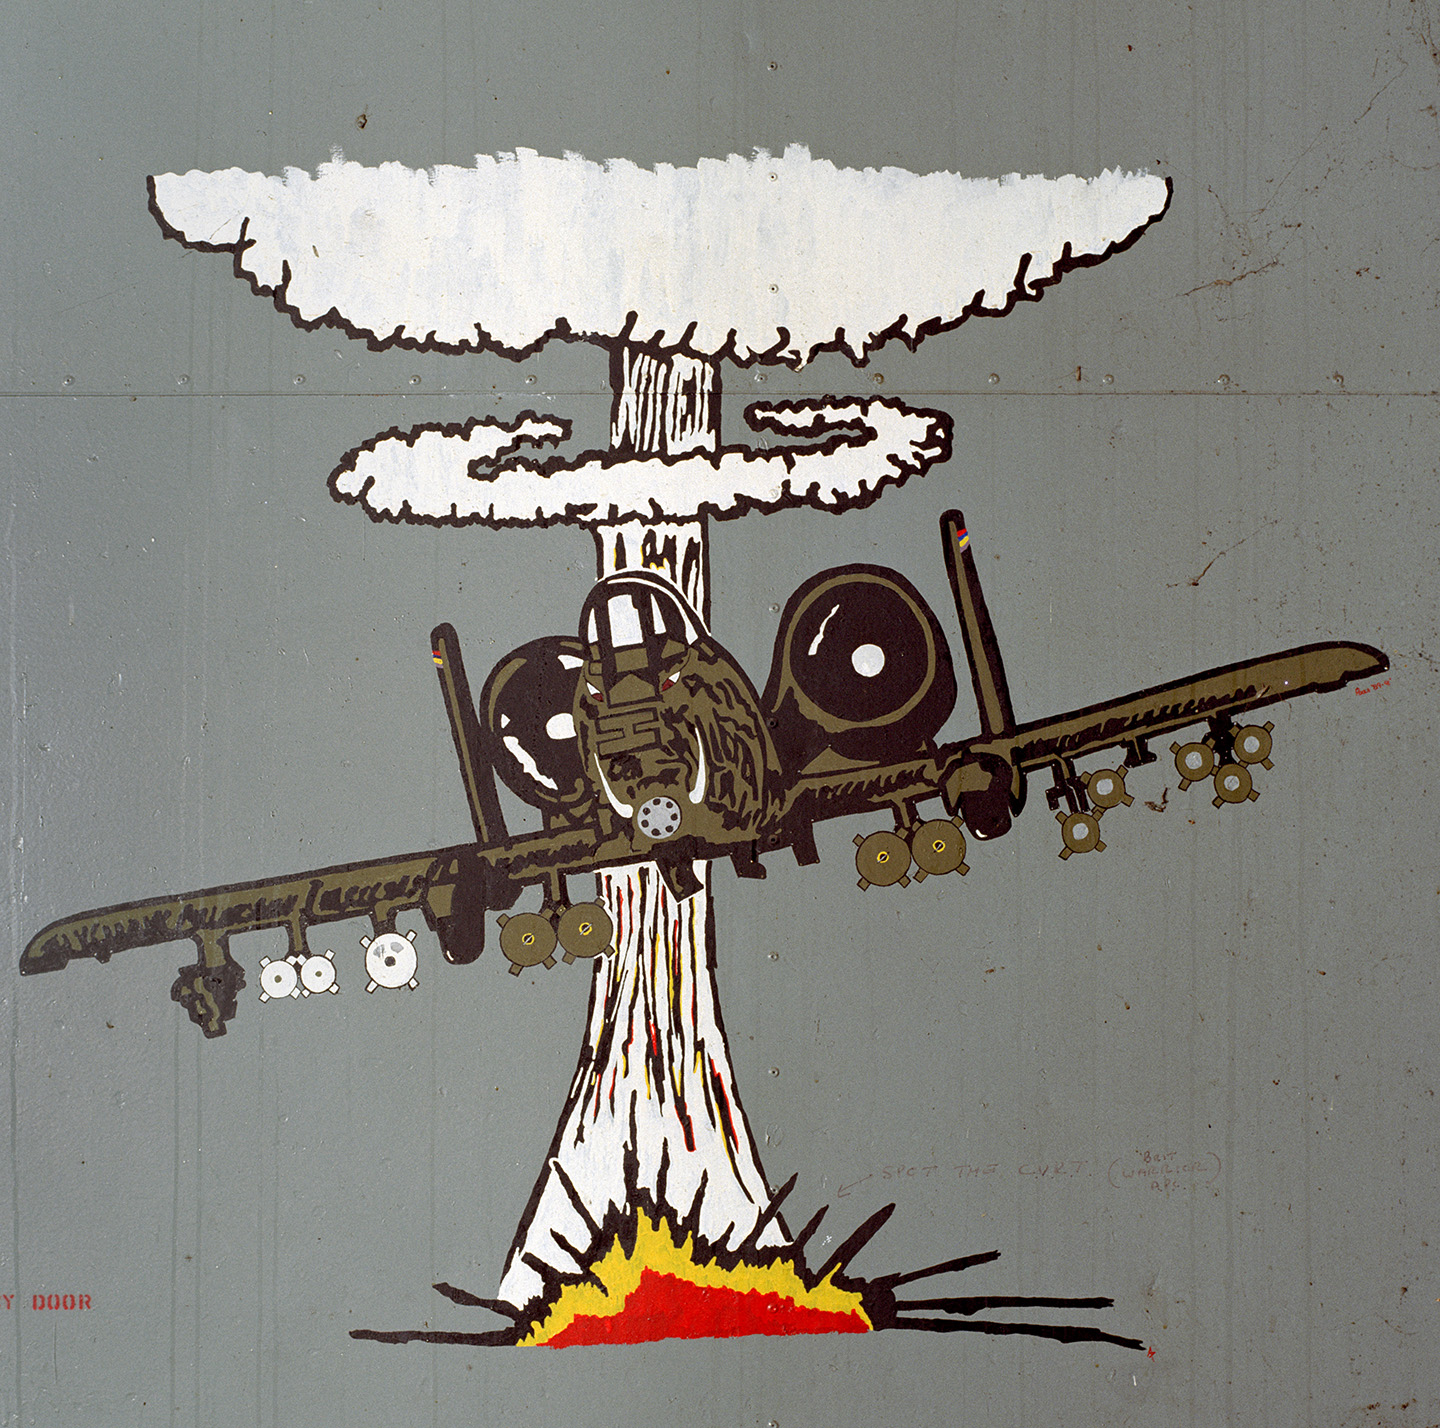 RAF Bentwaters, Suffolk, a painting of an A-10 Thunderbolt, nicknamed the Warthog, aircraft flying through a mushroom cloud.